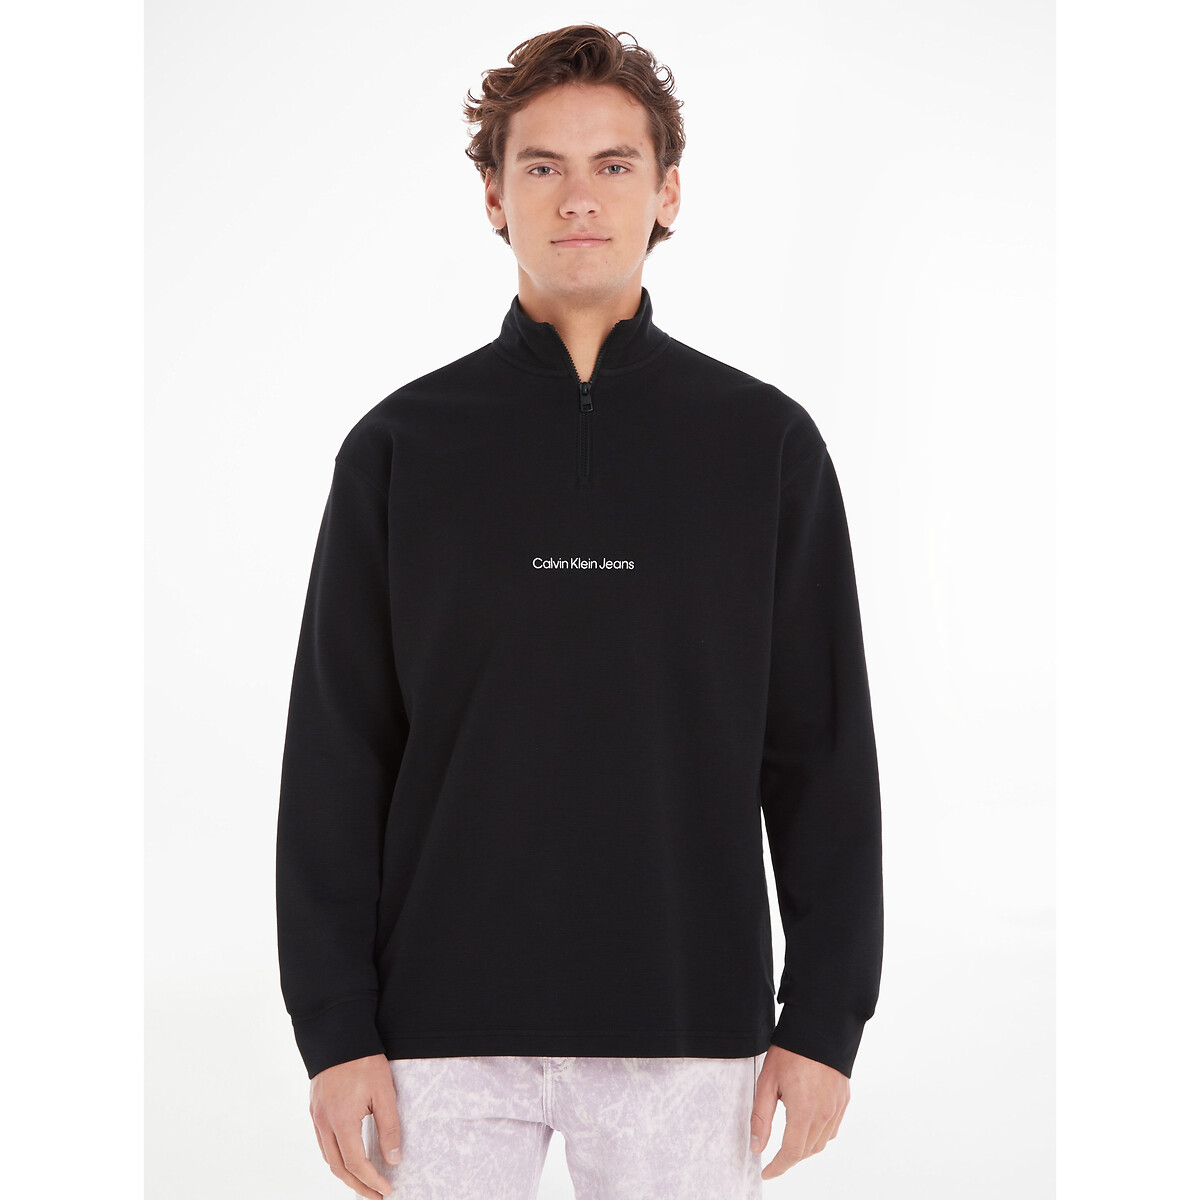 Image of Embroidered Logo Cotton Jumper with Half Zip